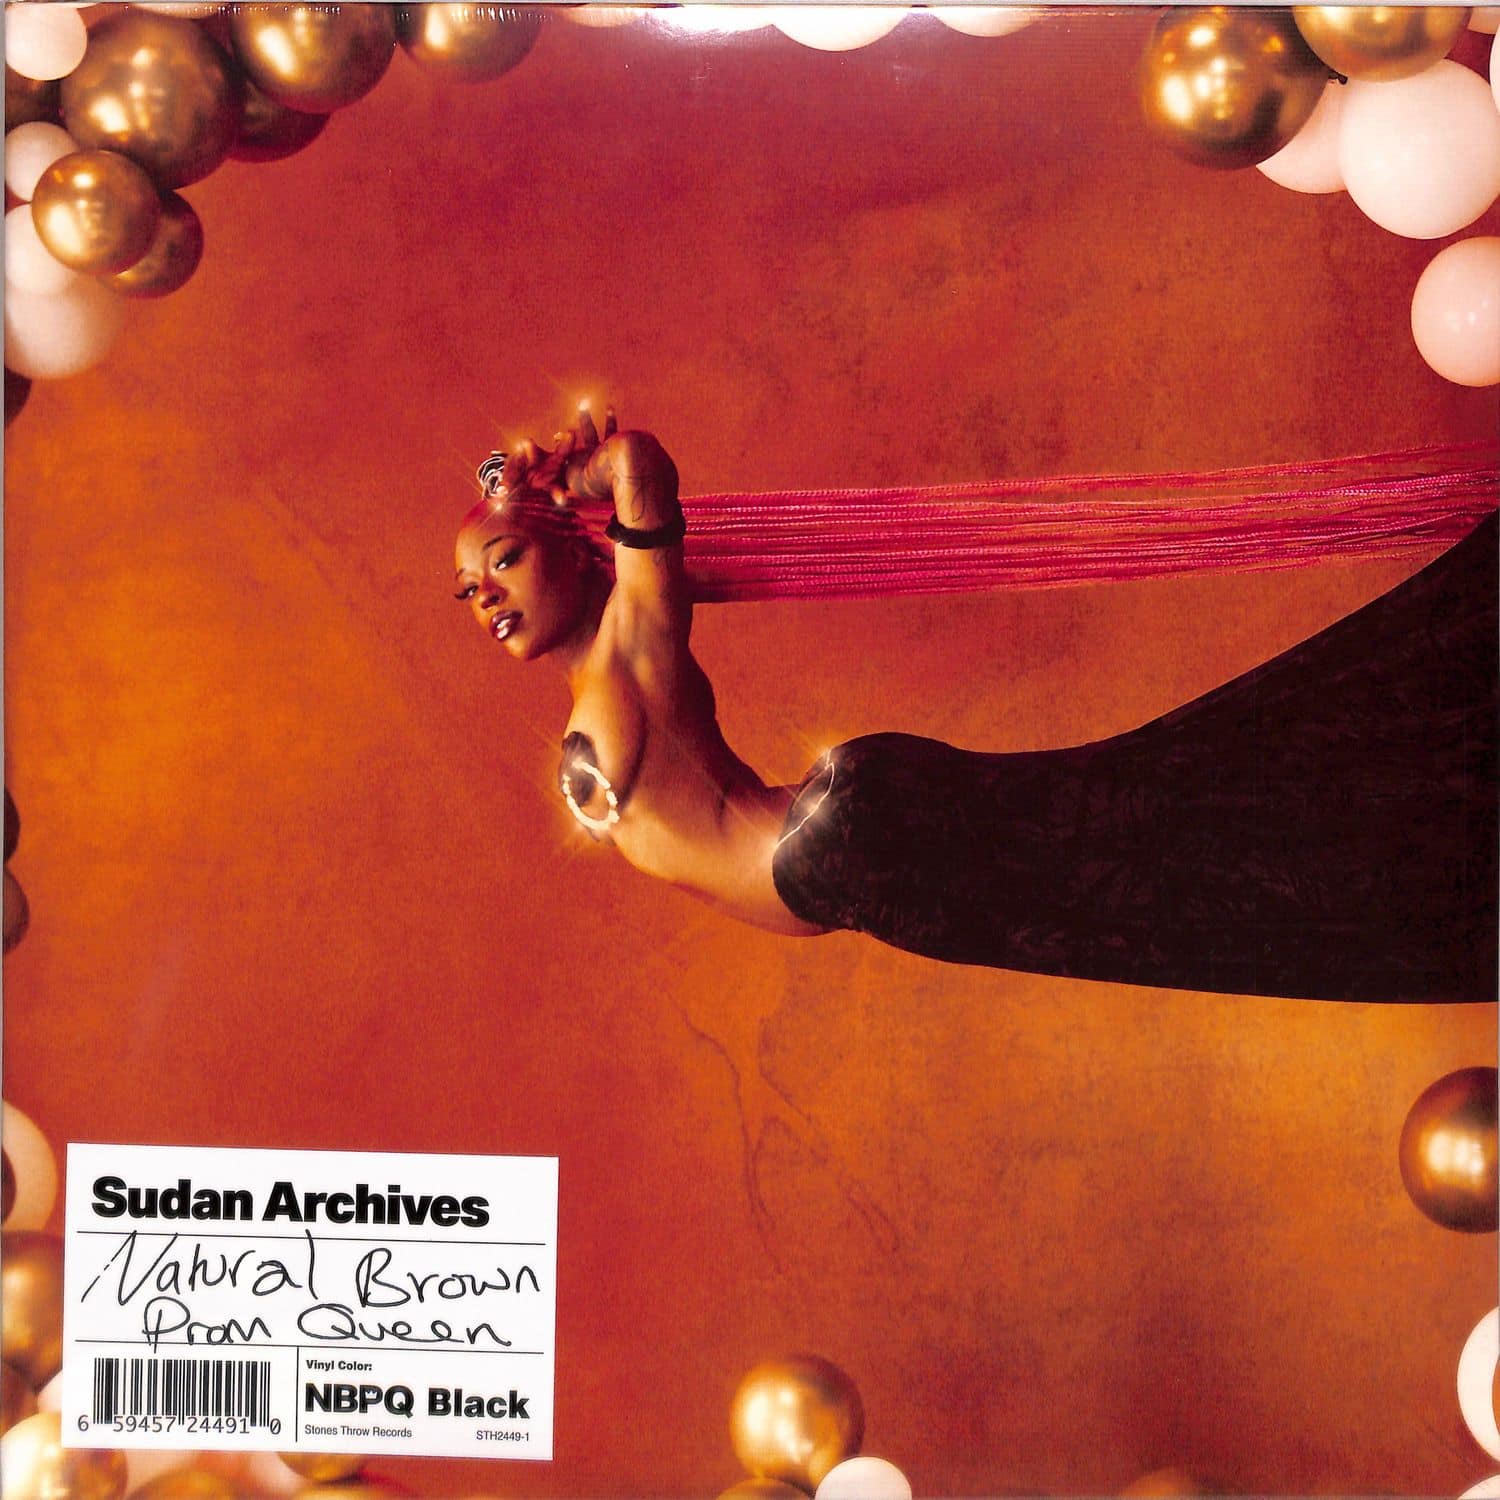 Sudan Archives - NATURAL BROWN PROM QUEEN 